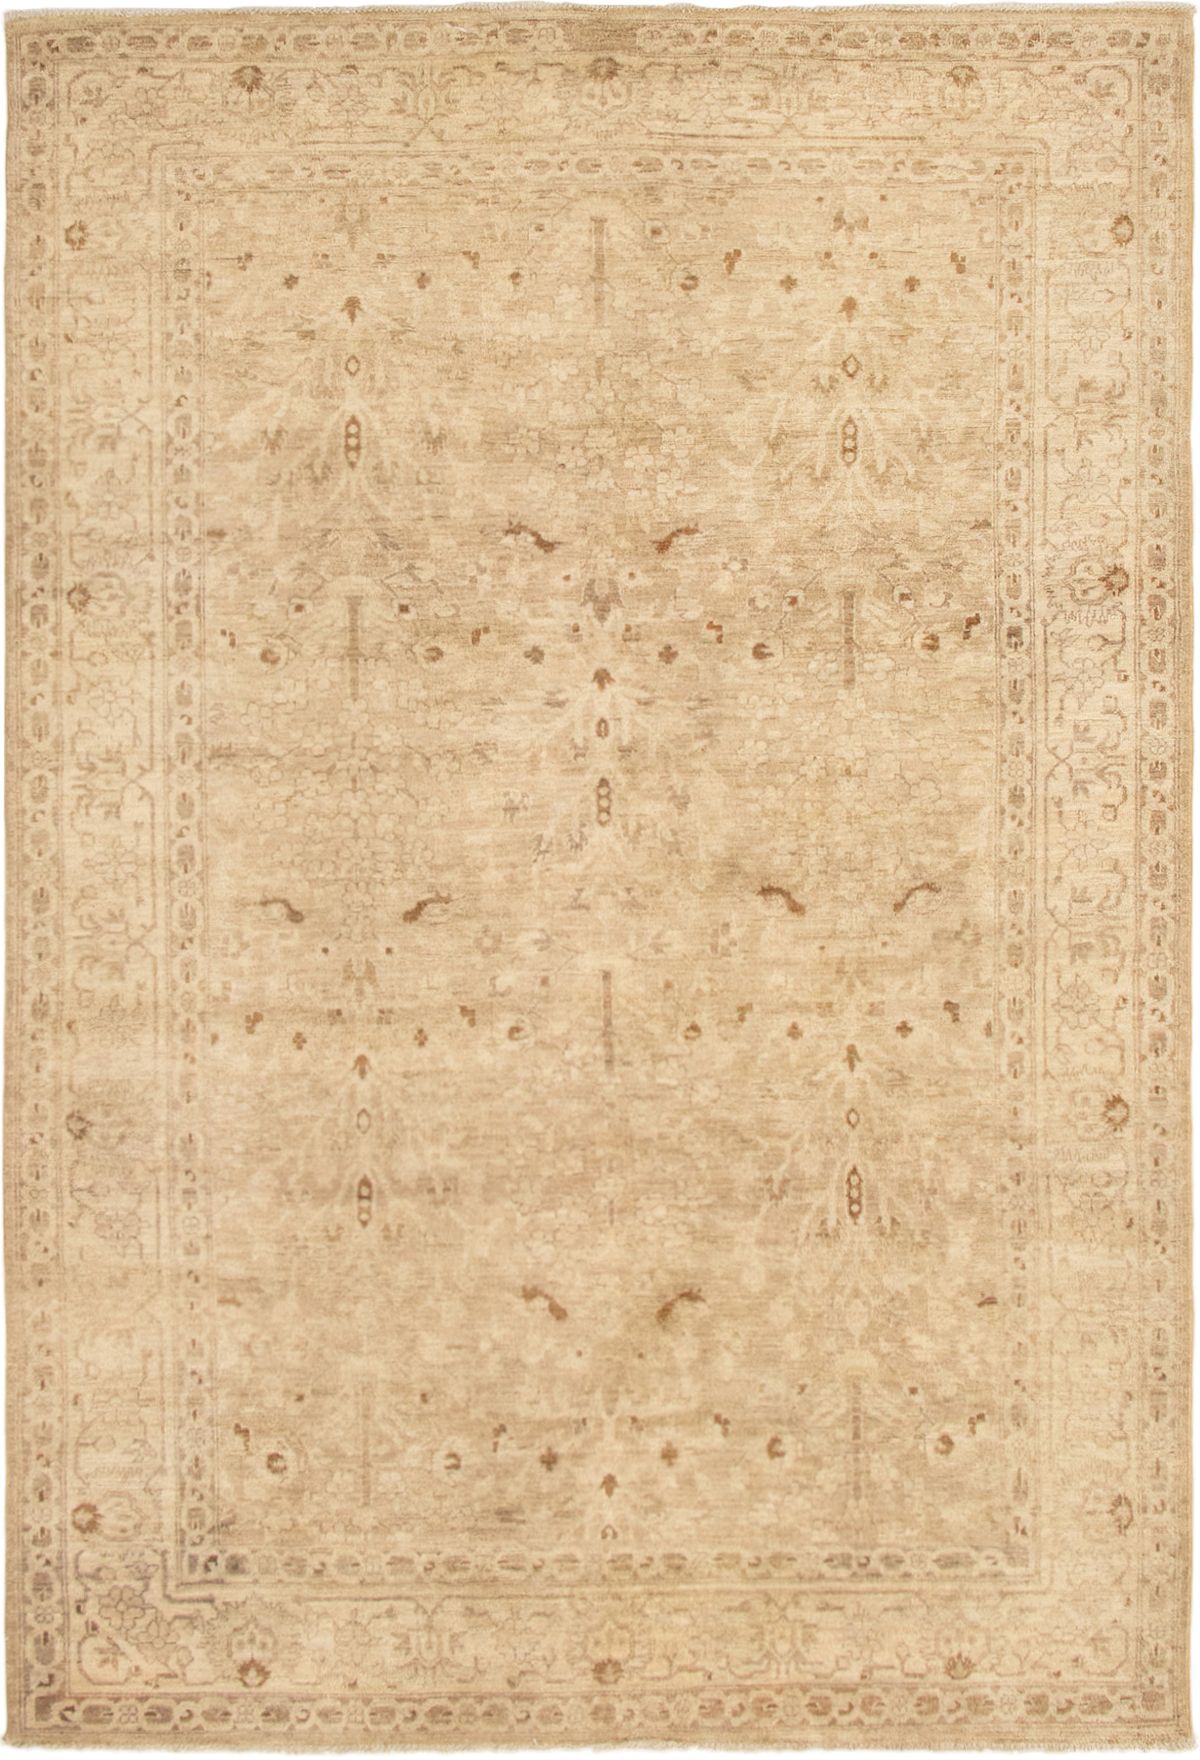 Hand-knotted Color Transition Light Khaki Wool Rug 6'1" x 8'11" Size: 6'1" x 8'11"  